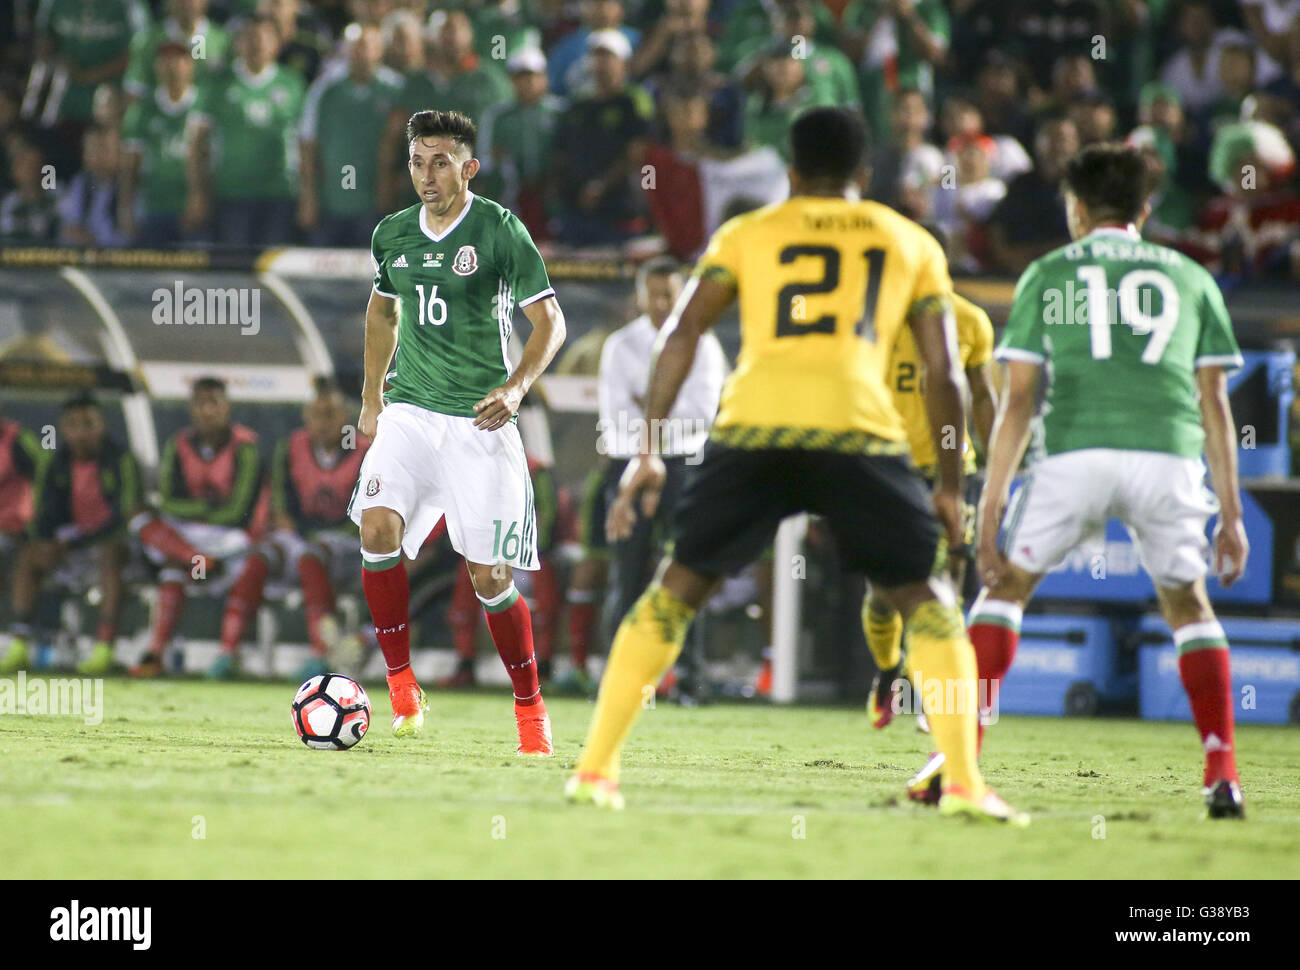 Los Angeles, California, USA. 9th June, 2016. Mexico midfielder Hector Herrera #16 in a Copa America soccer match between Mexico and ÃŠJamaica of Group C at the Rose Bowl in Pasadena, California, June 9, 2016. Mexico won 2-0. Credit:  Ringo Chiu/ZUMA Wire/Alamy Live News Stock Photo